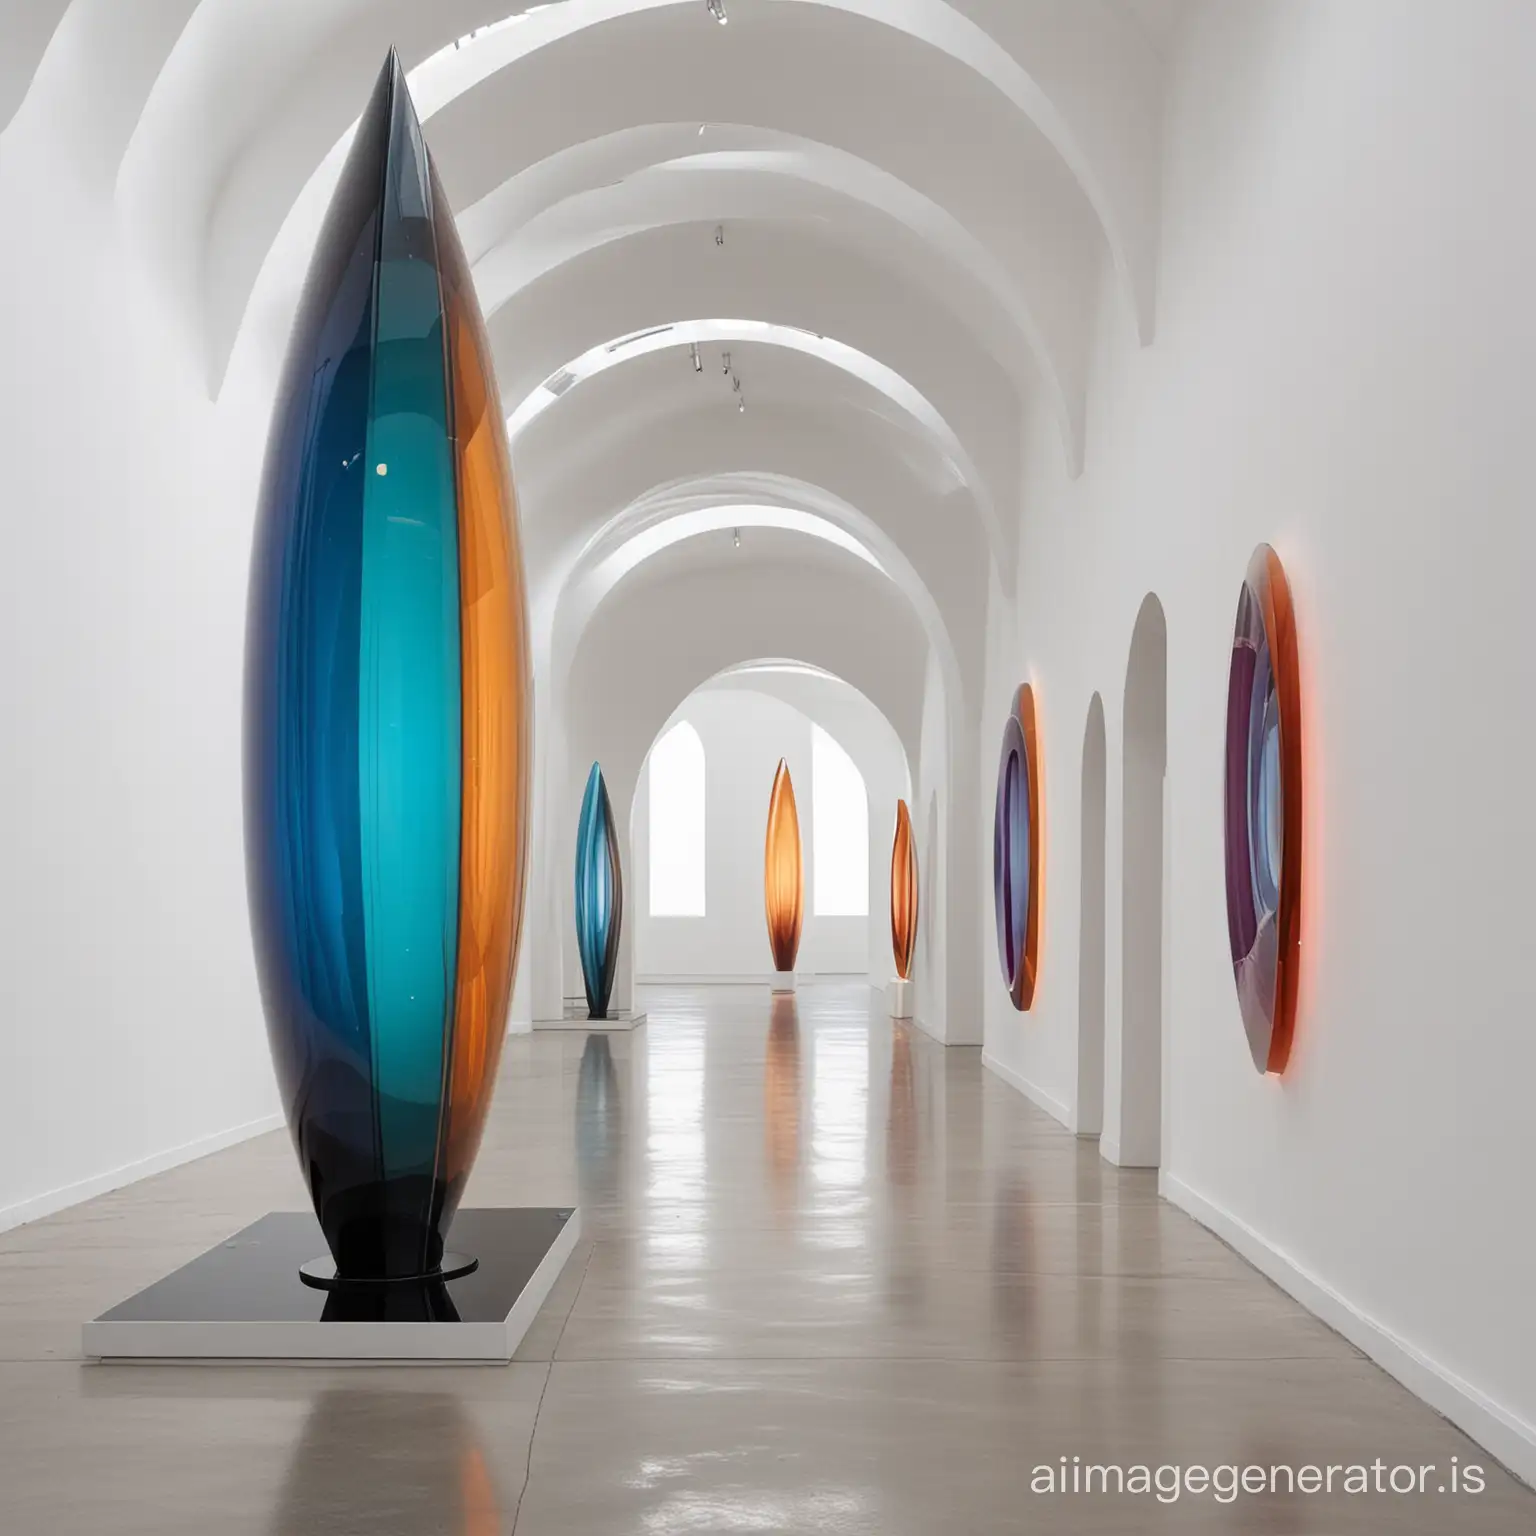 Colorful-Glass-Wormhole-Sculptures-in-Minimalist-Gallery-Setting